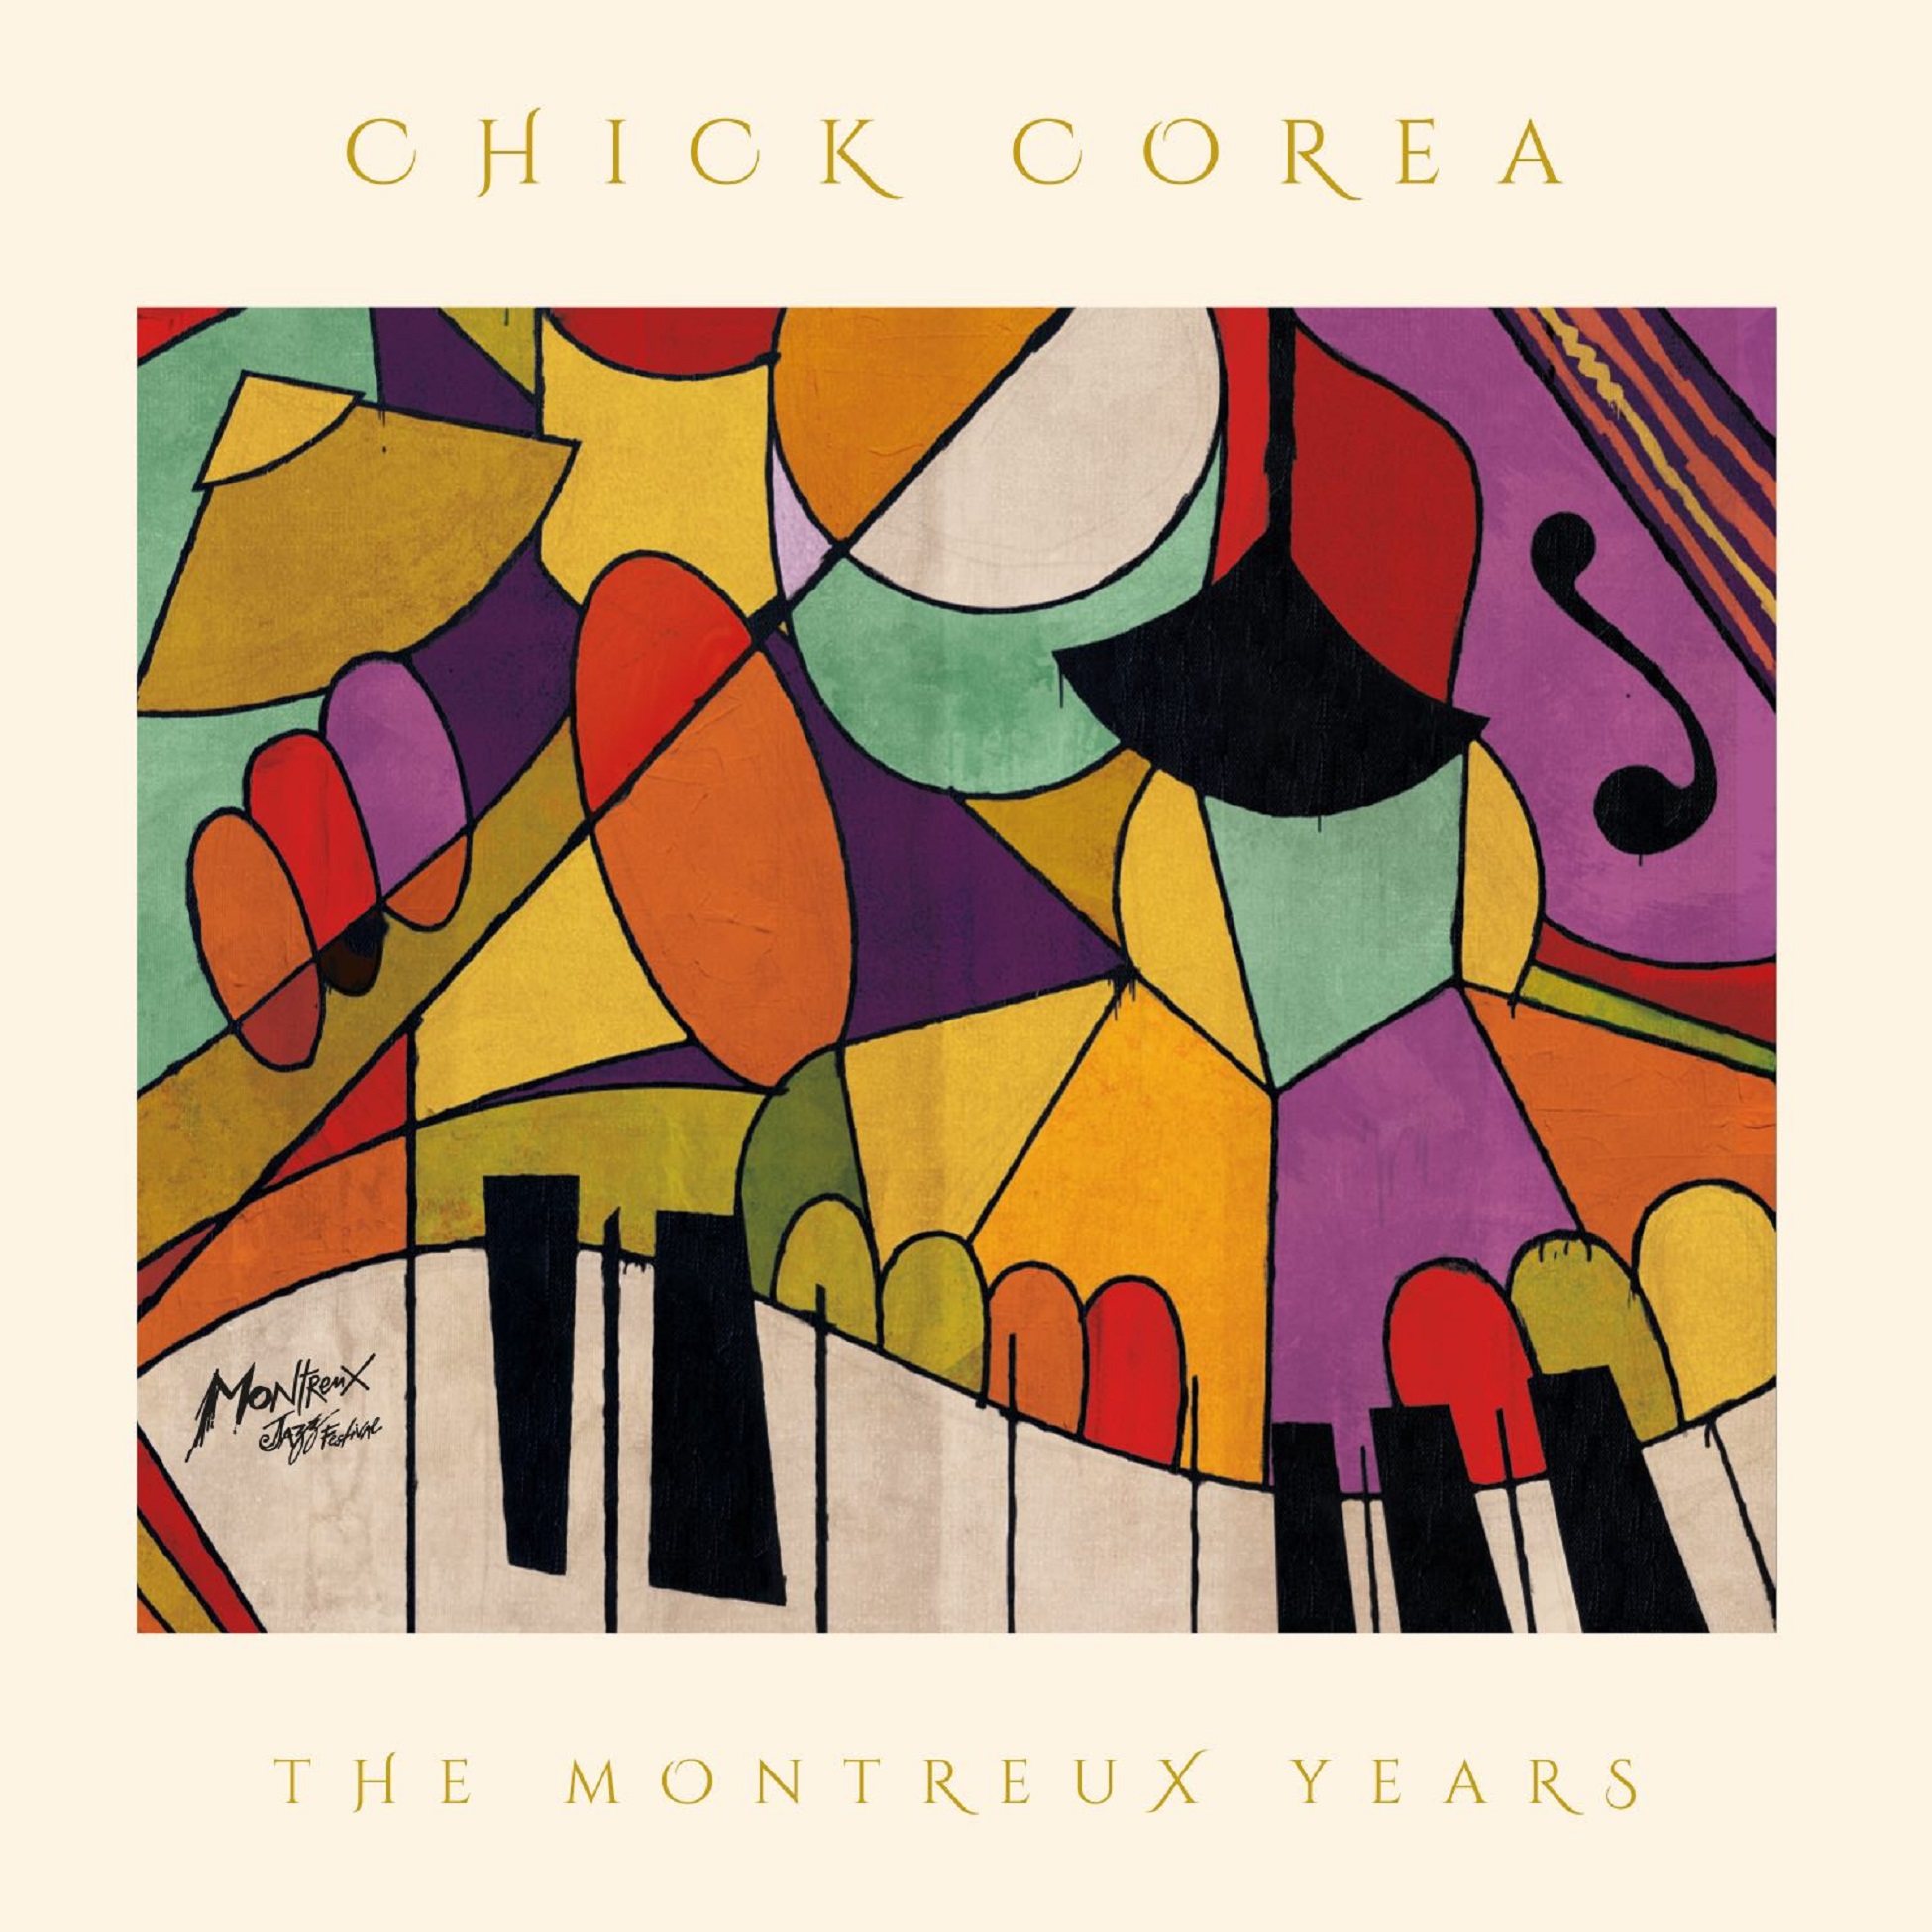 CHICK COREA: THE MONTREUX YEARS ~ Next Release in the Montreux Years Series ~ Out September 23